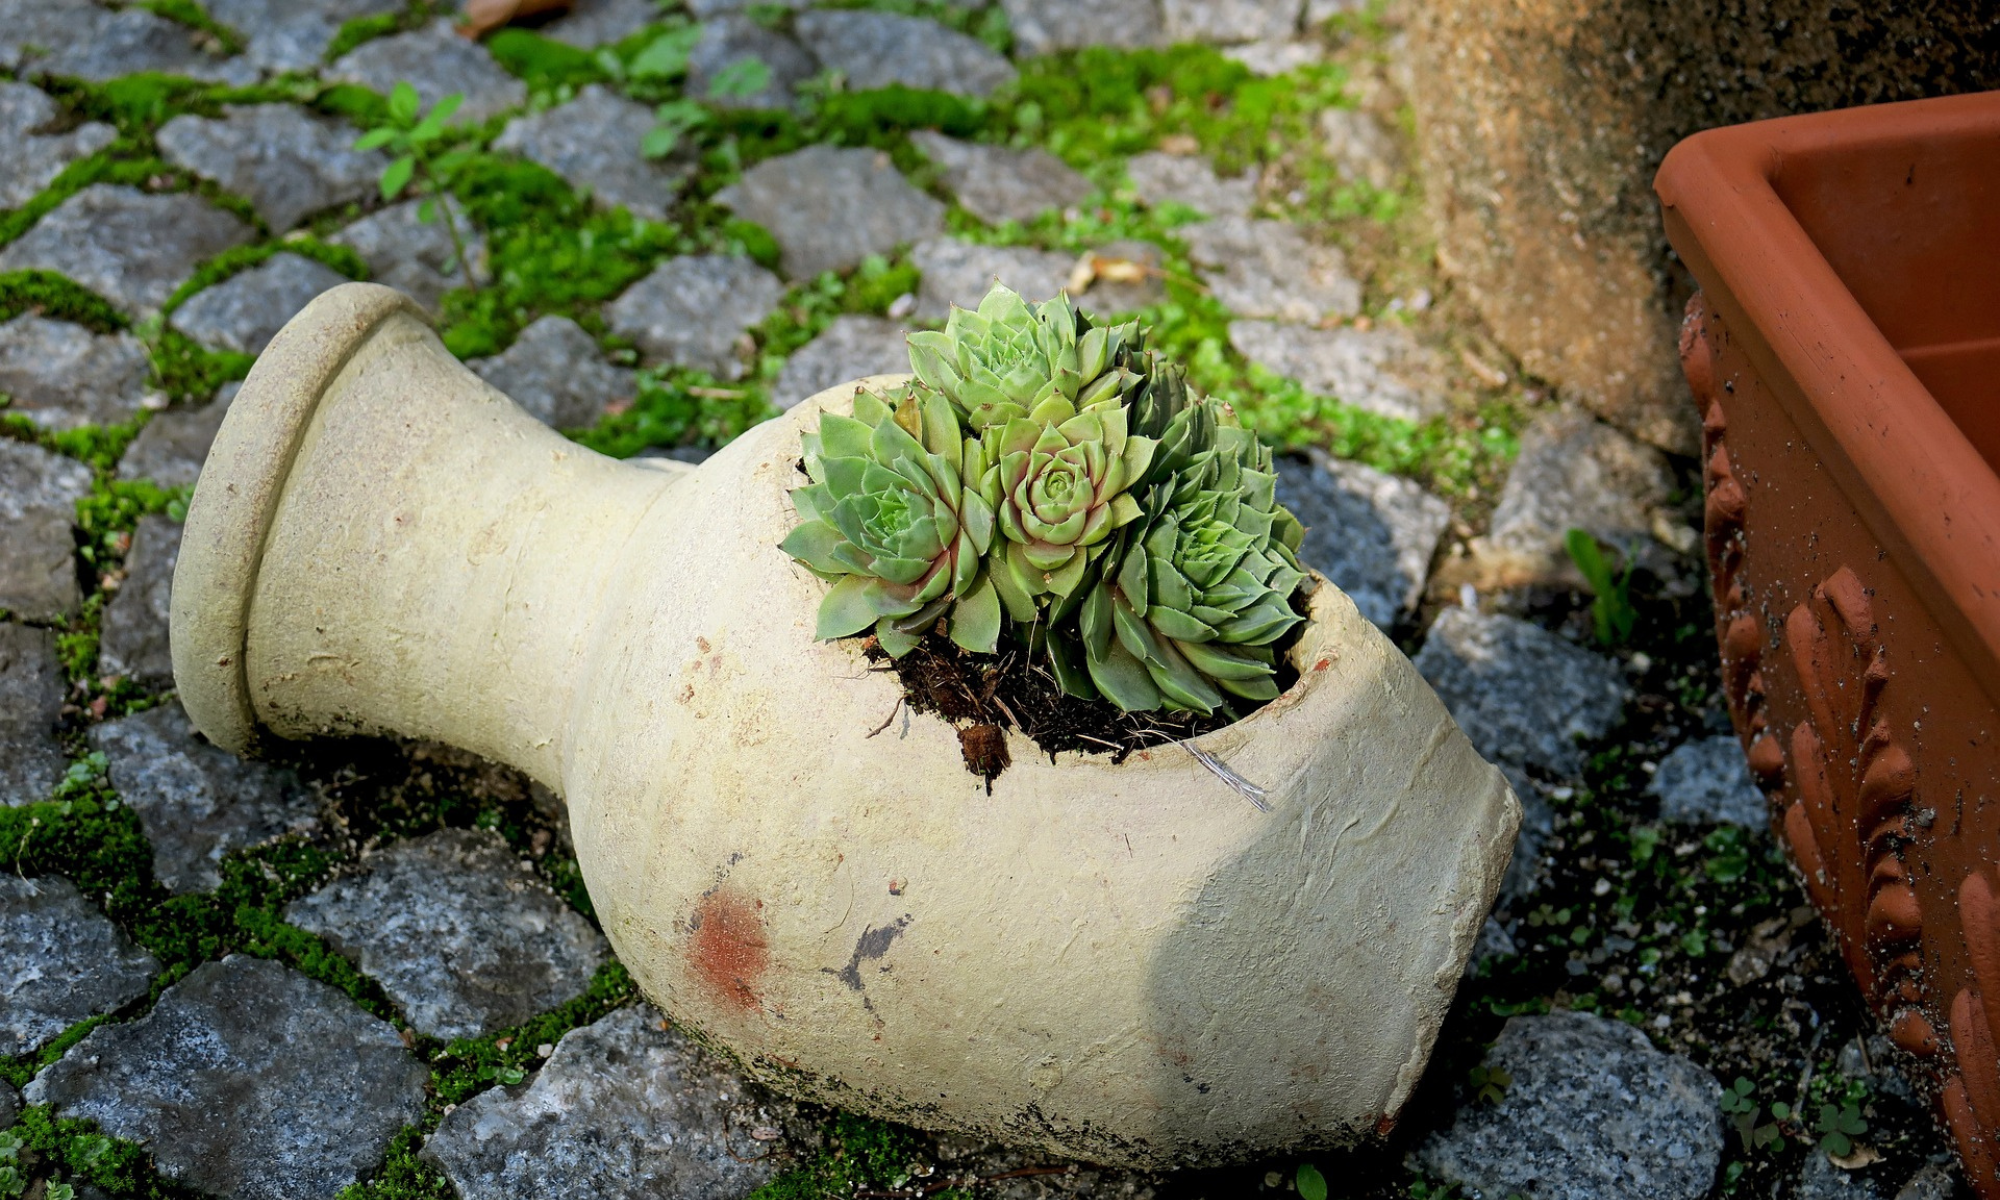 A photo of a succulent plant potted in a jar, resting on a bed of small rocks and grass in a landscape setting